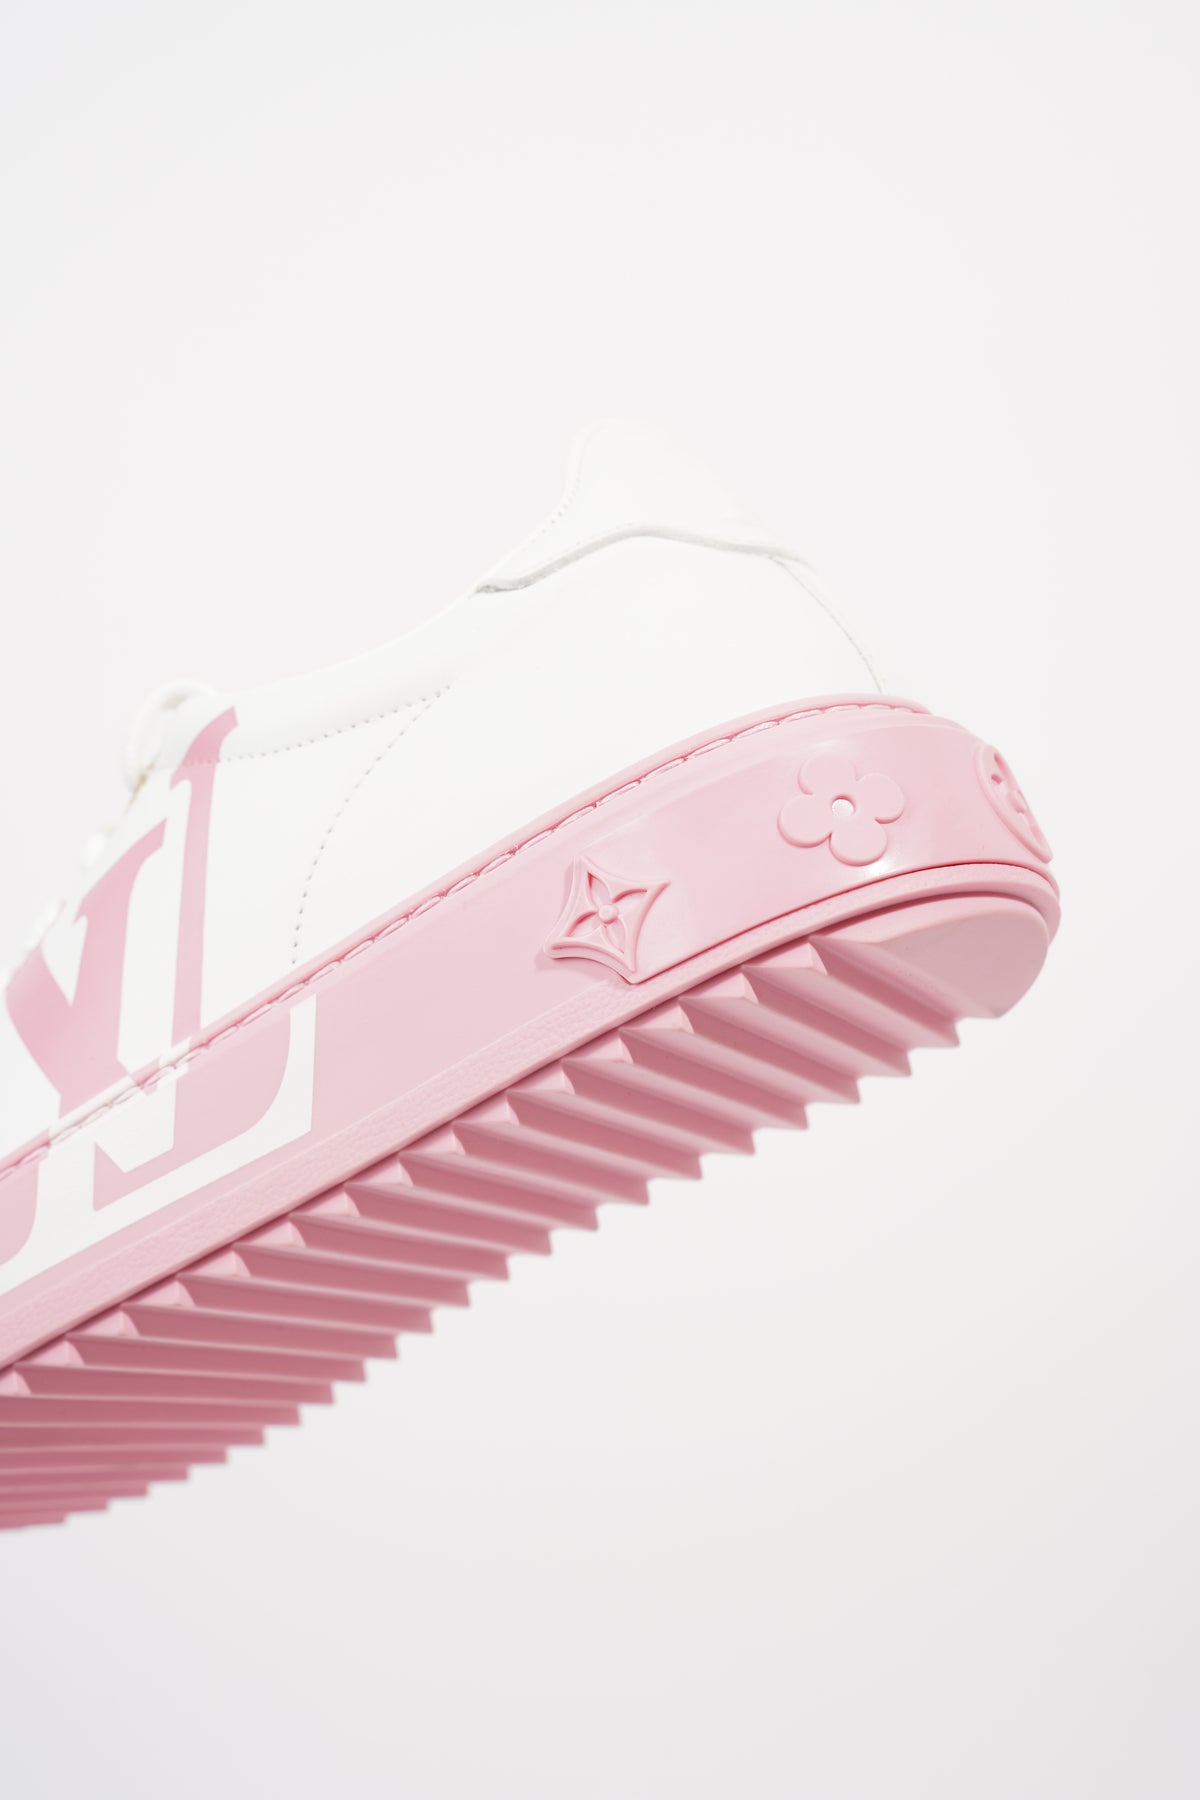 Louis Vuitton Time Out Sneaker White / Pink Leather EU 36 UK 3 – Luxe  Collective